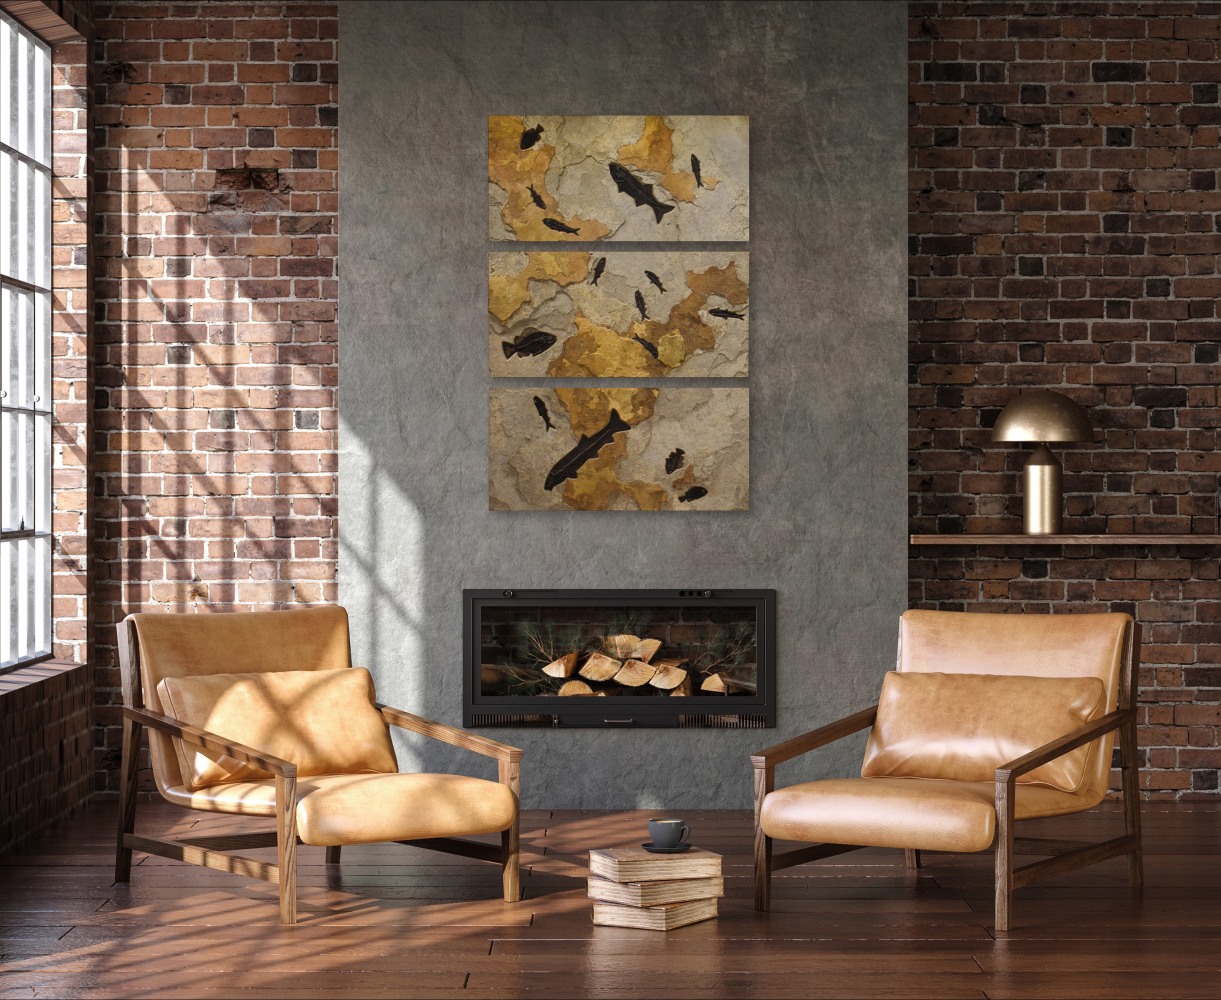 Fossil Fish Triptych 1008ABC (SOLD) - A large, vertical triptych mural ...